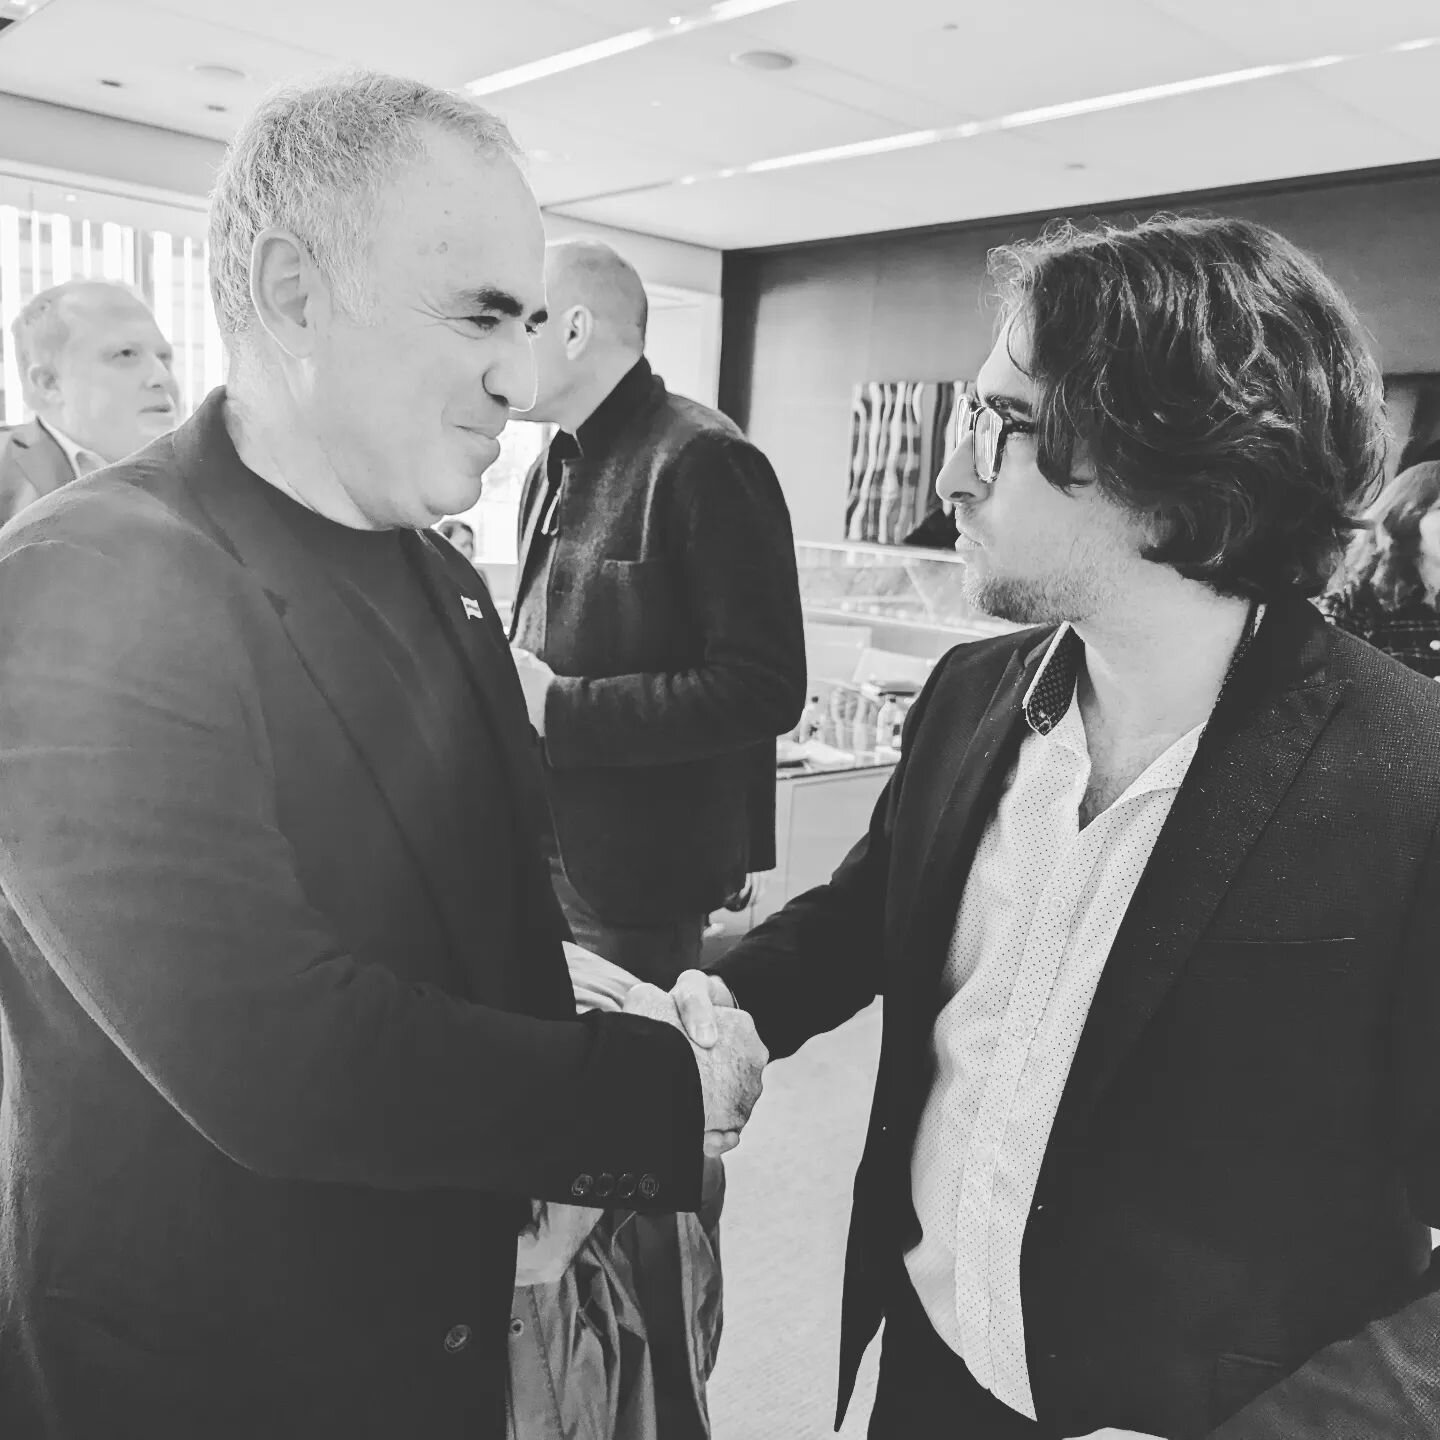 That time I made Garry Kasparov, one of the strongest chess players of all time take a &quot;serious&quot; handshake photo. #chess #kasparov #legend #vibing #silly